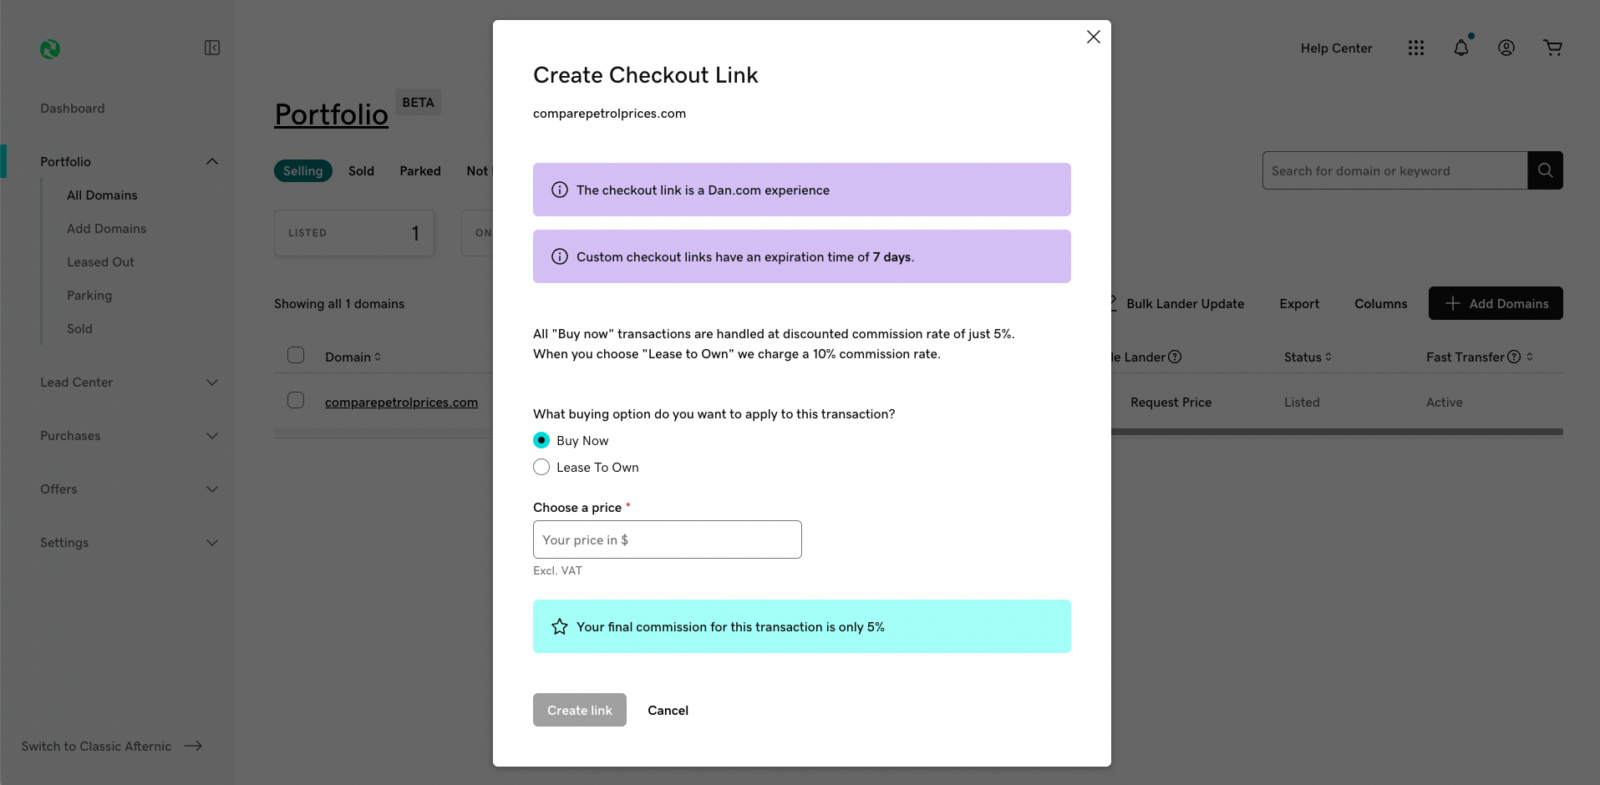 Introducing Custom Checkout Link – Your Partner for Closing External Sales